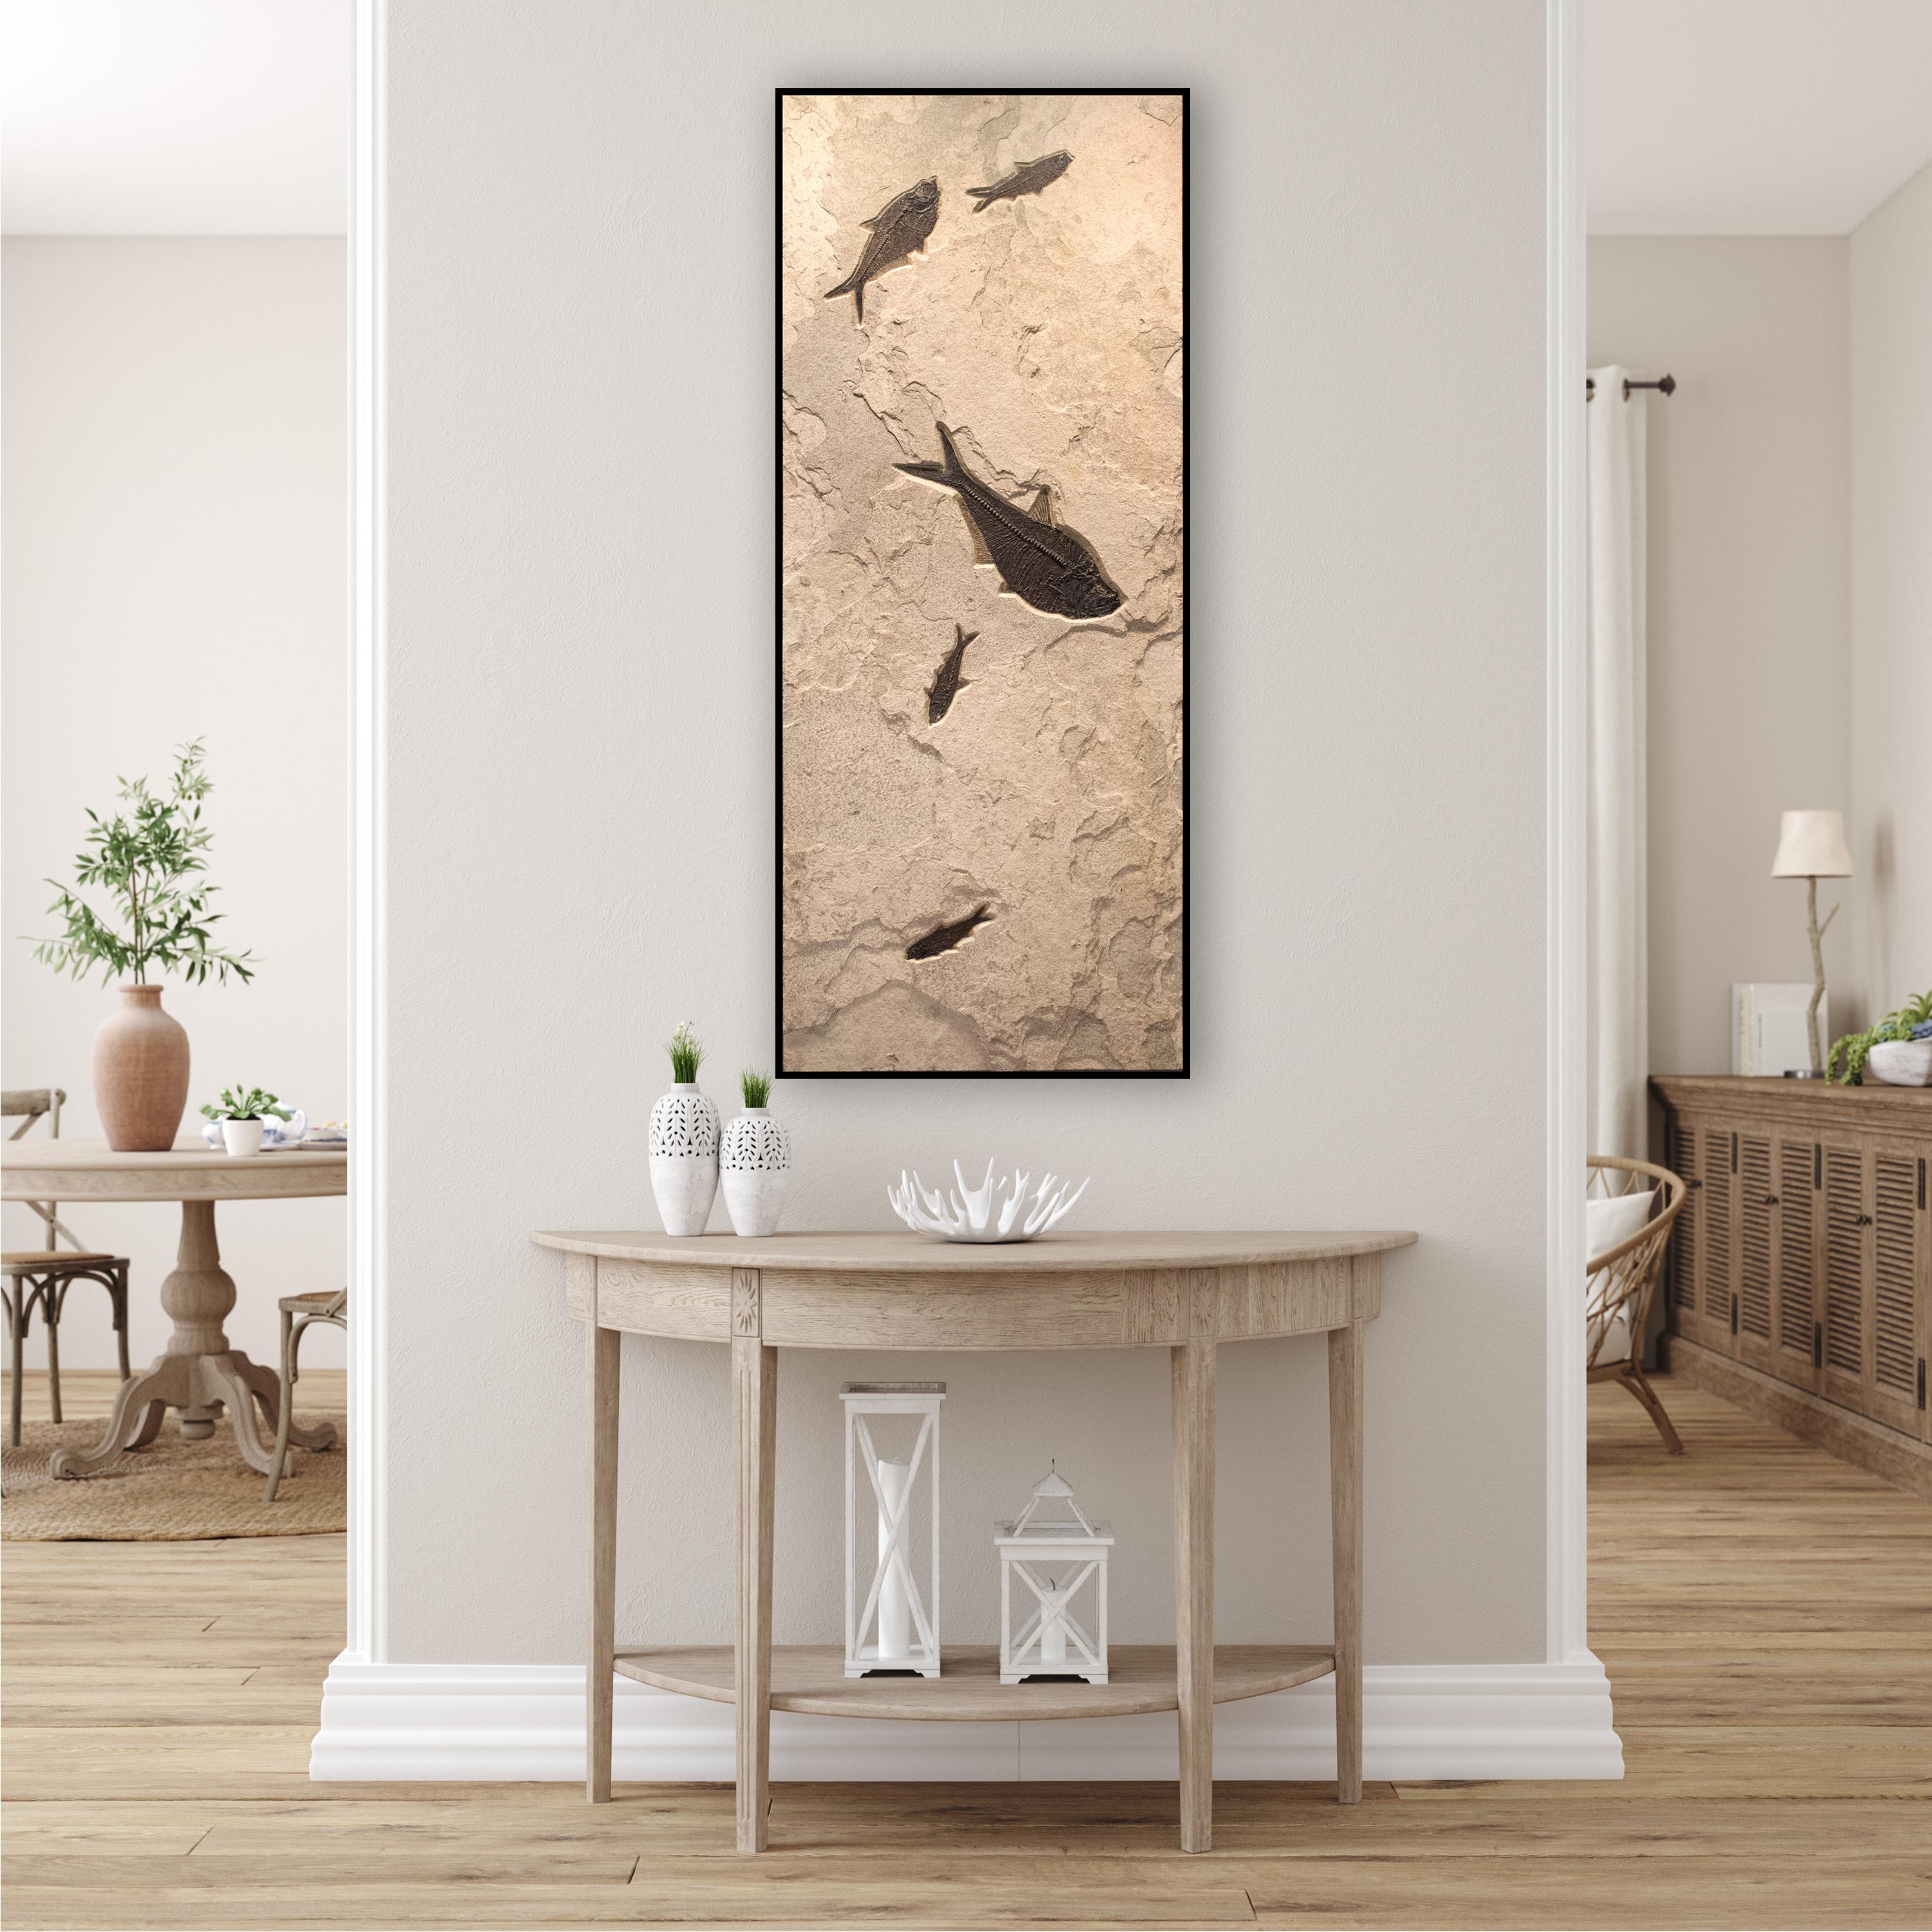 This sculptural stone mural features fossil fish from the Green River Formation: two Diplomystus dentatus and three Knightia eocaena. These fish are Eocene era fossils dating back about 50 million years. These ancient fish are forever preserved in a